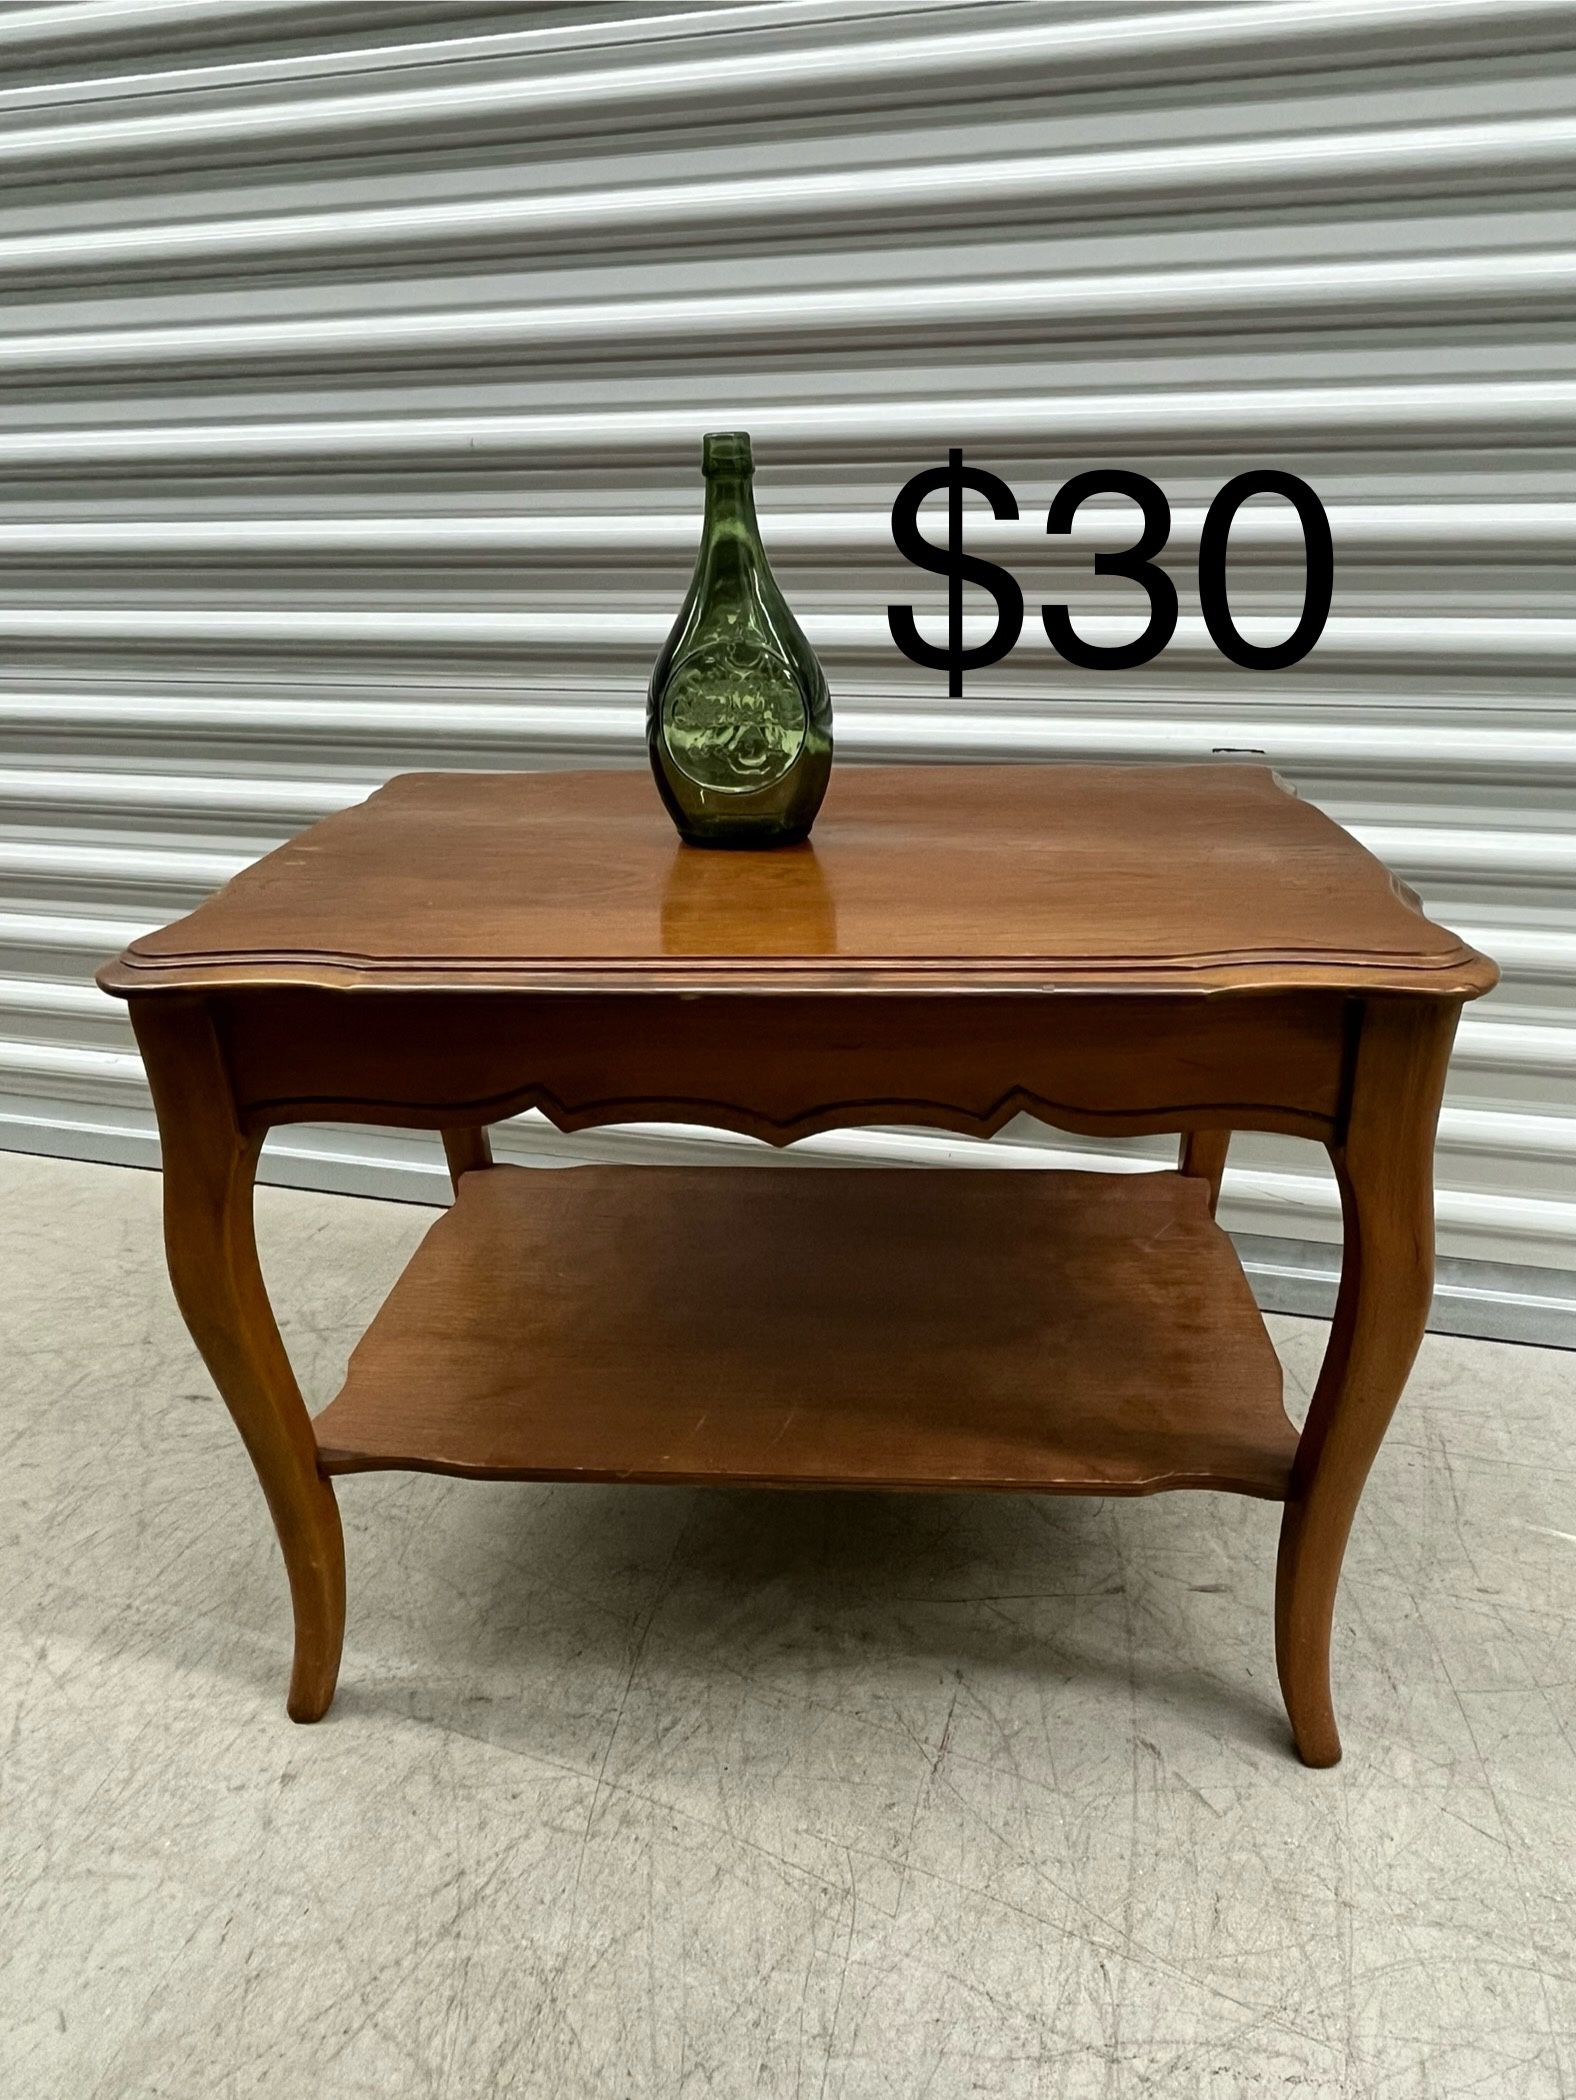 Vintage French Provincial Style End Table